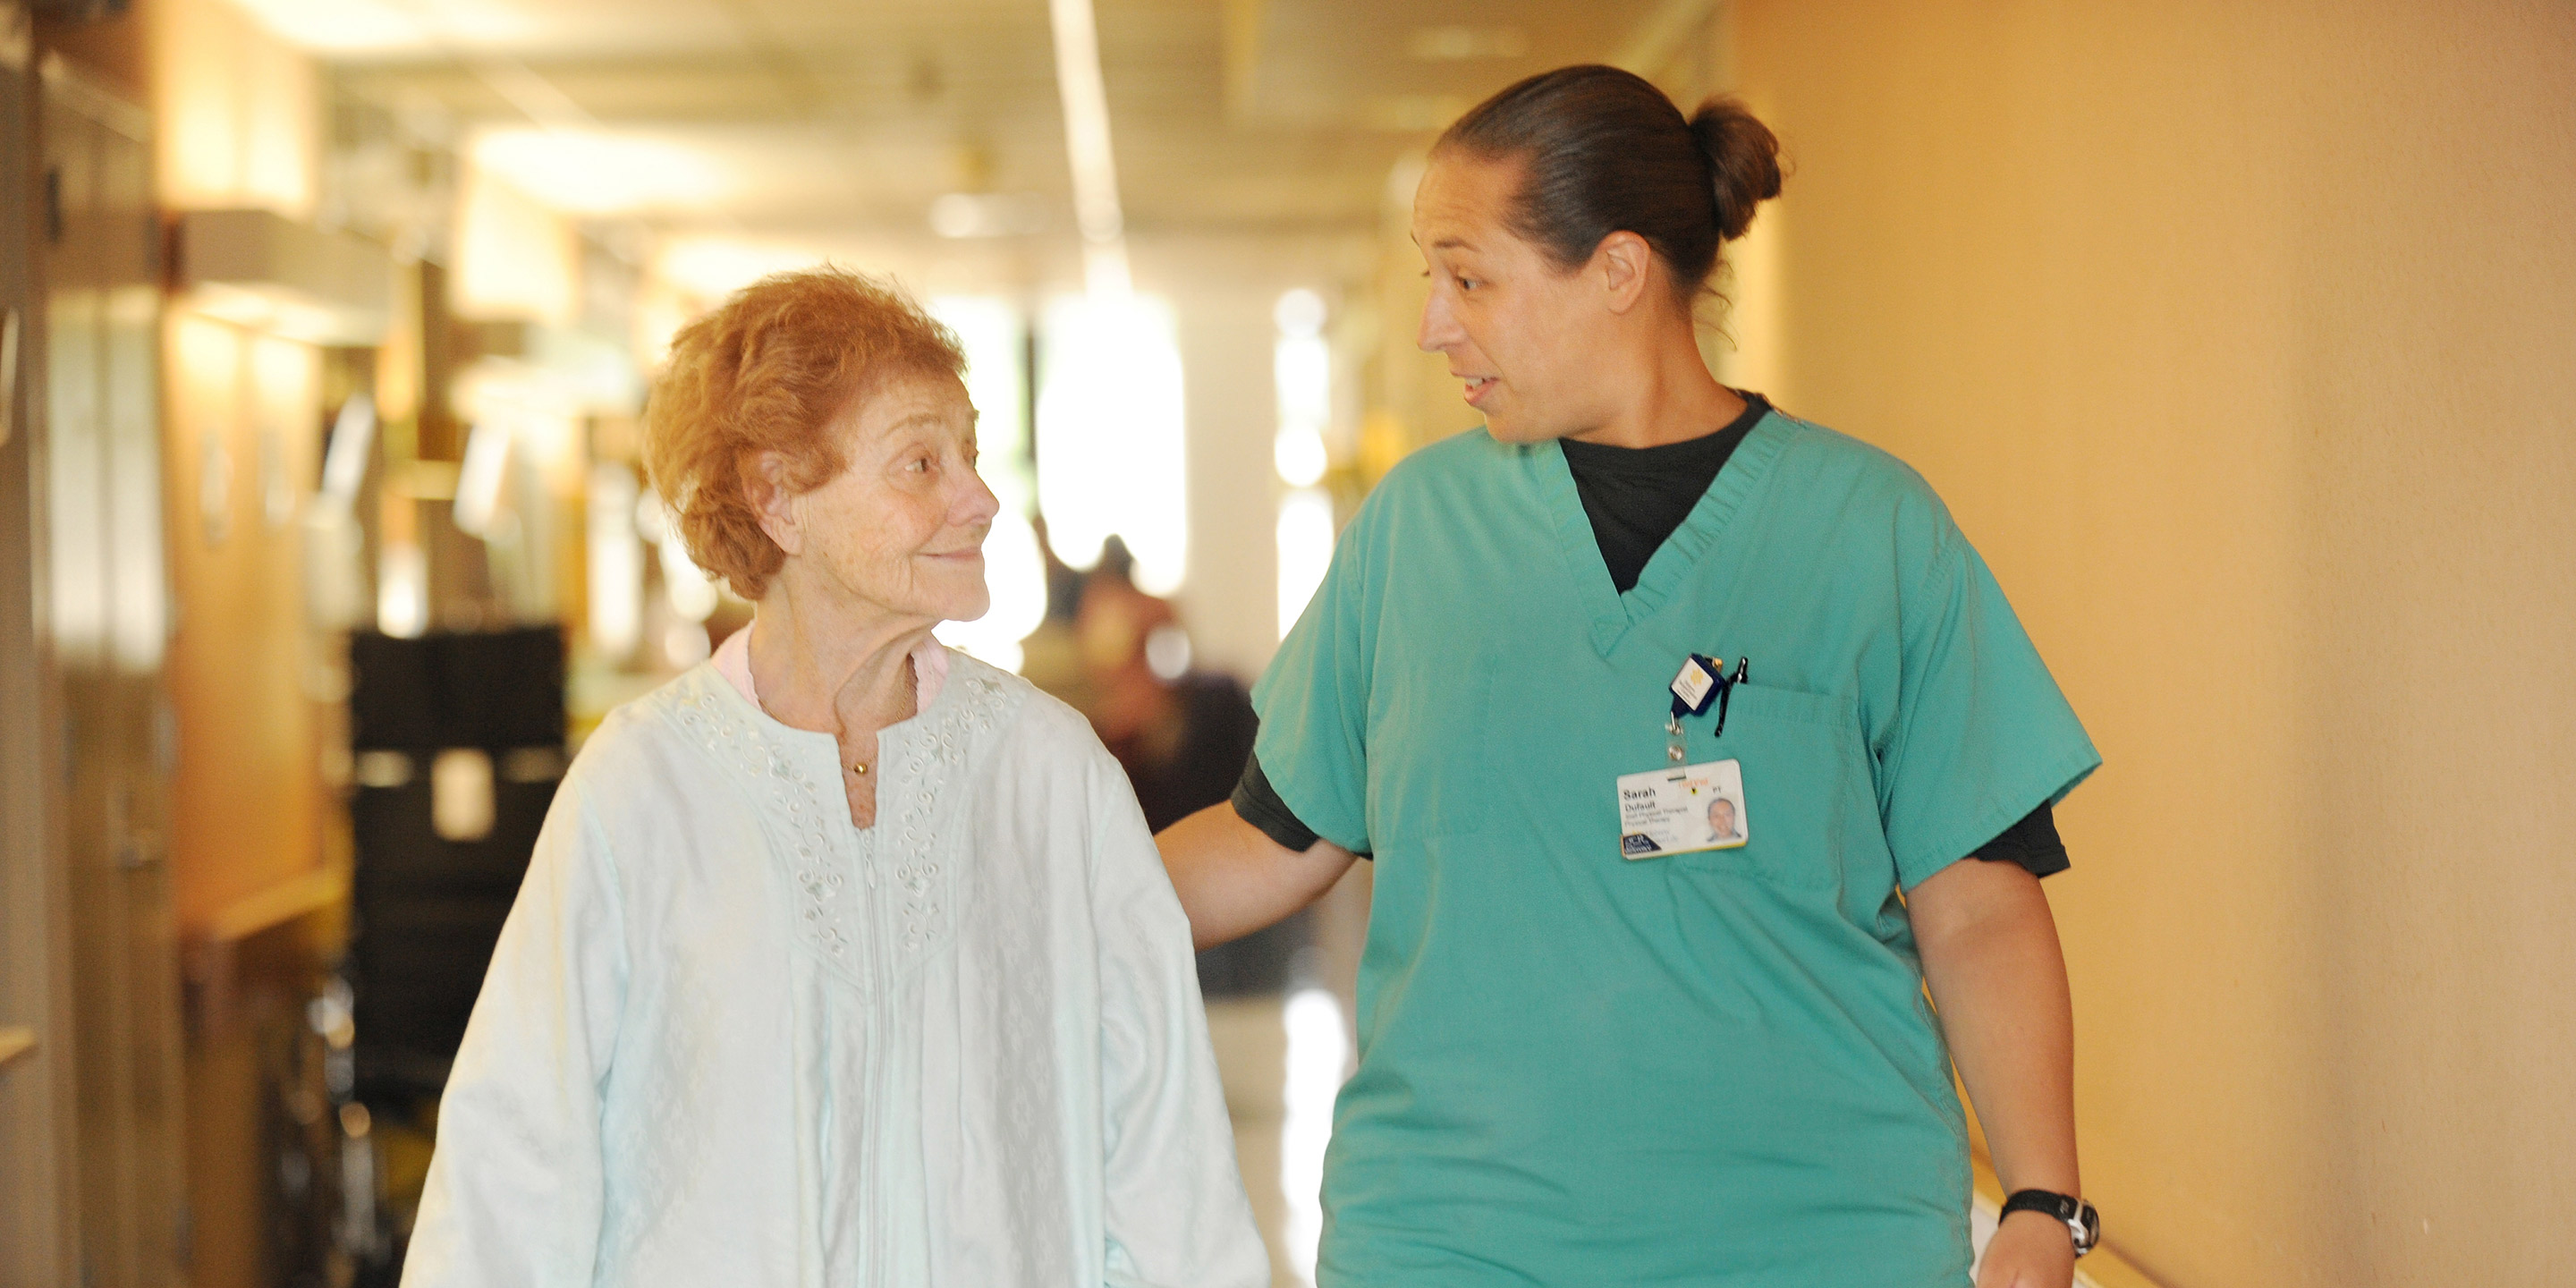 A patient smiles while walking down a hallway with a staff member at HRC Roslindale.